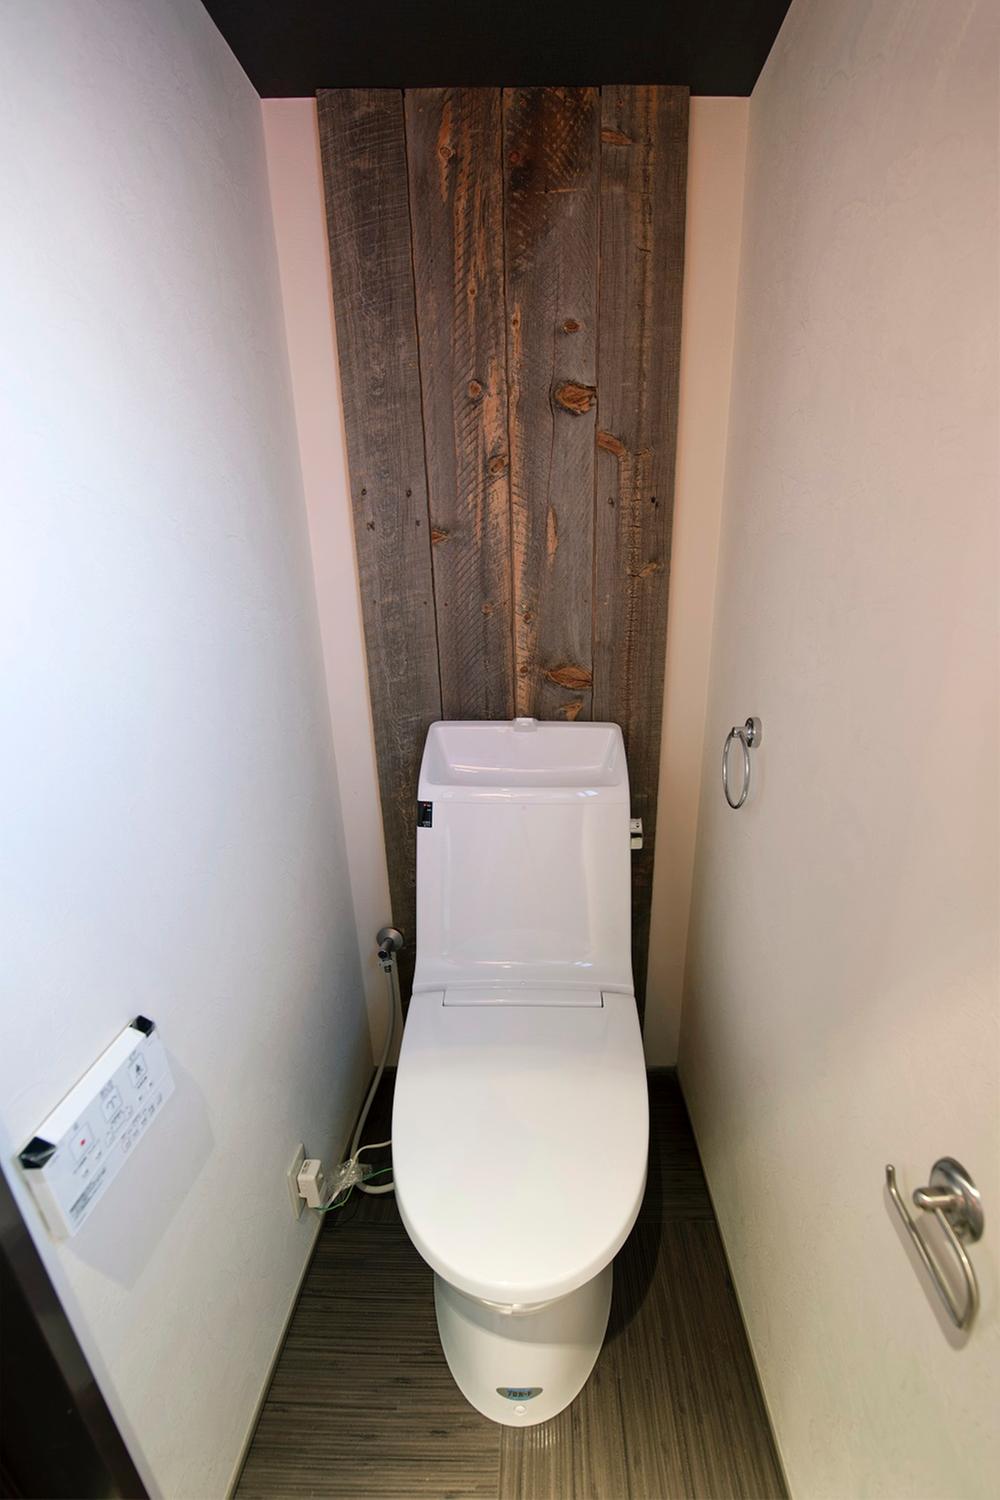 Toilet. I had made the shower toilet in the restroom calm of indirect lighting and accent panel.